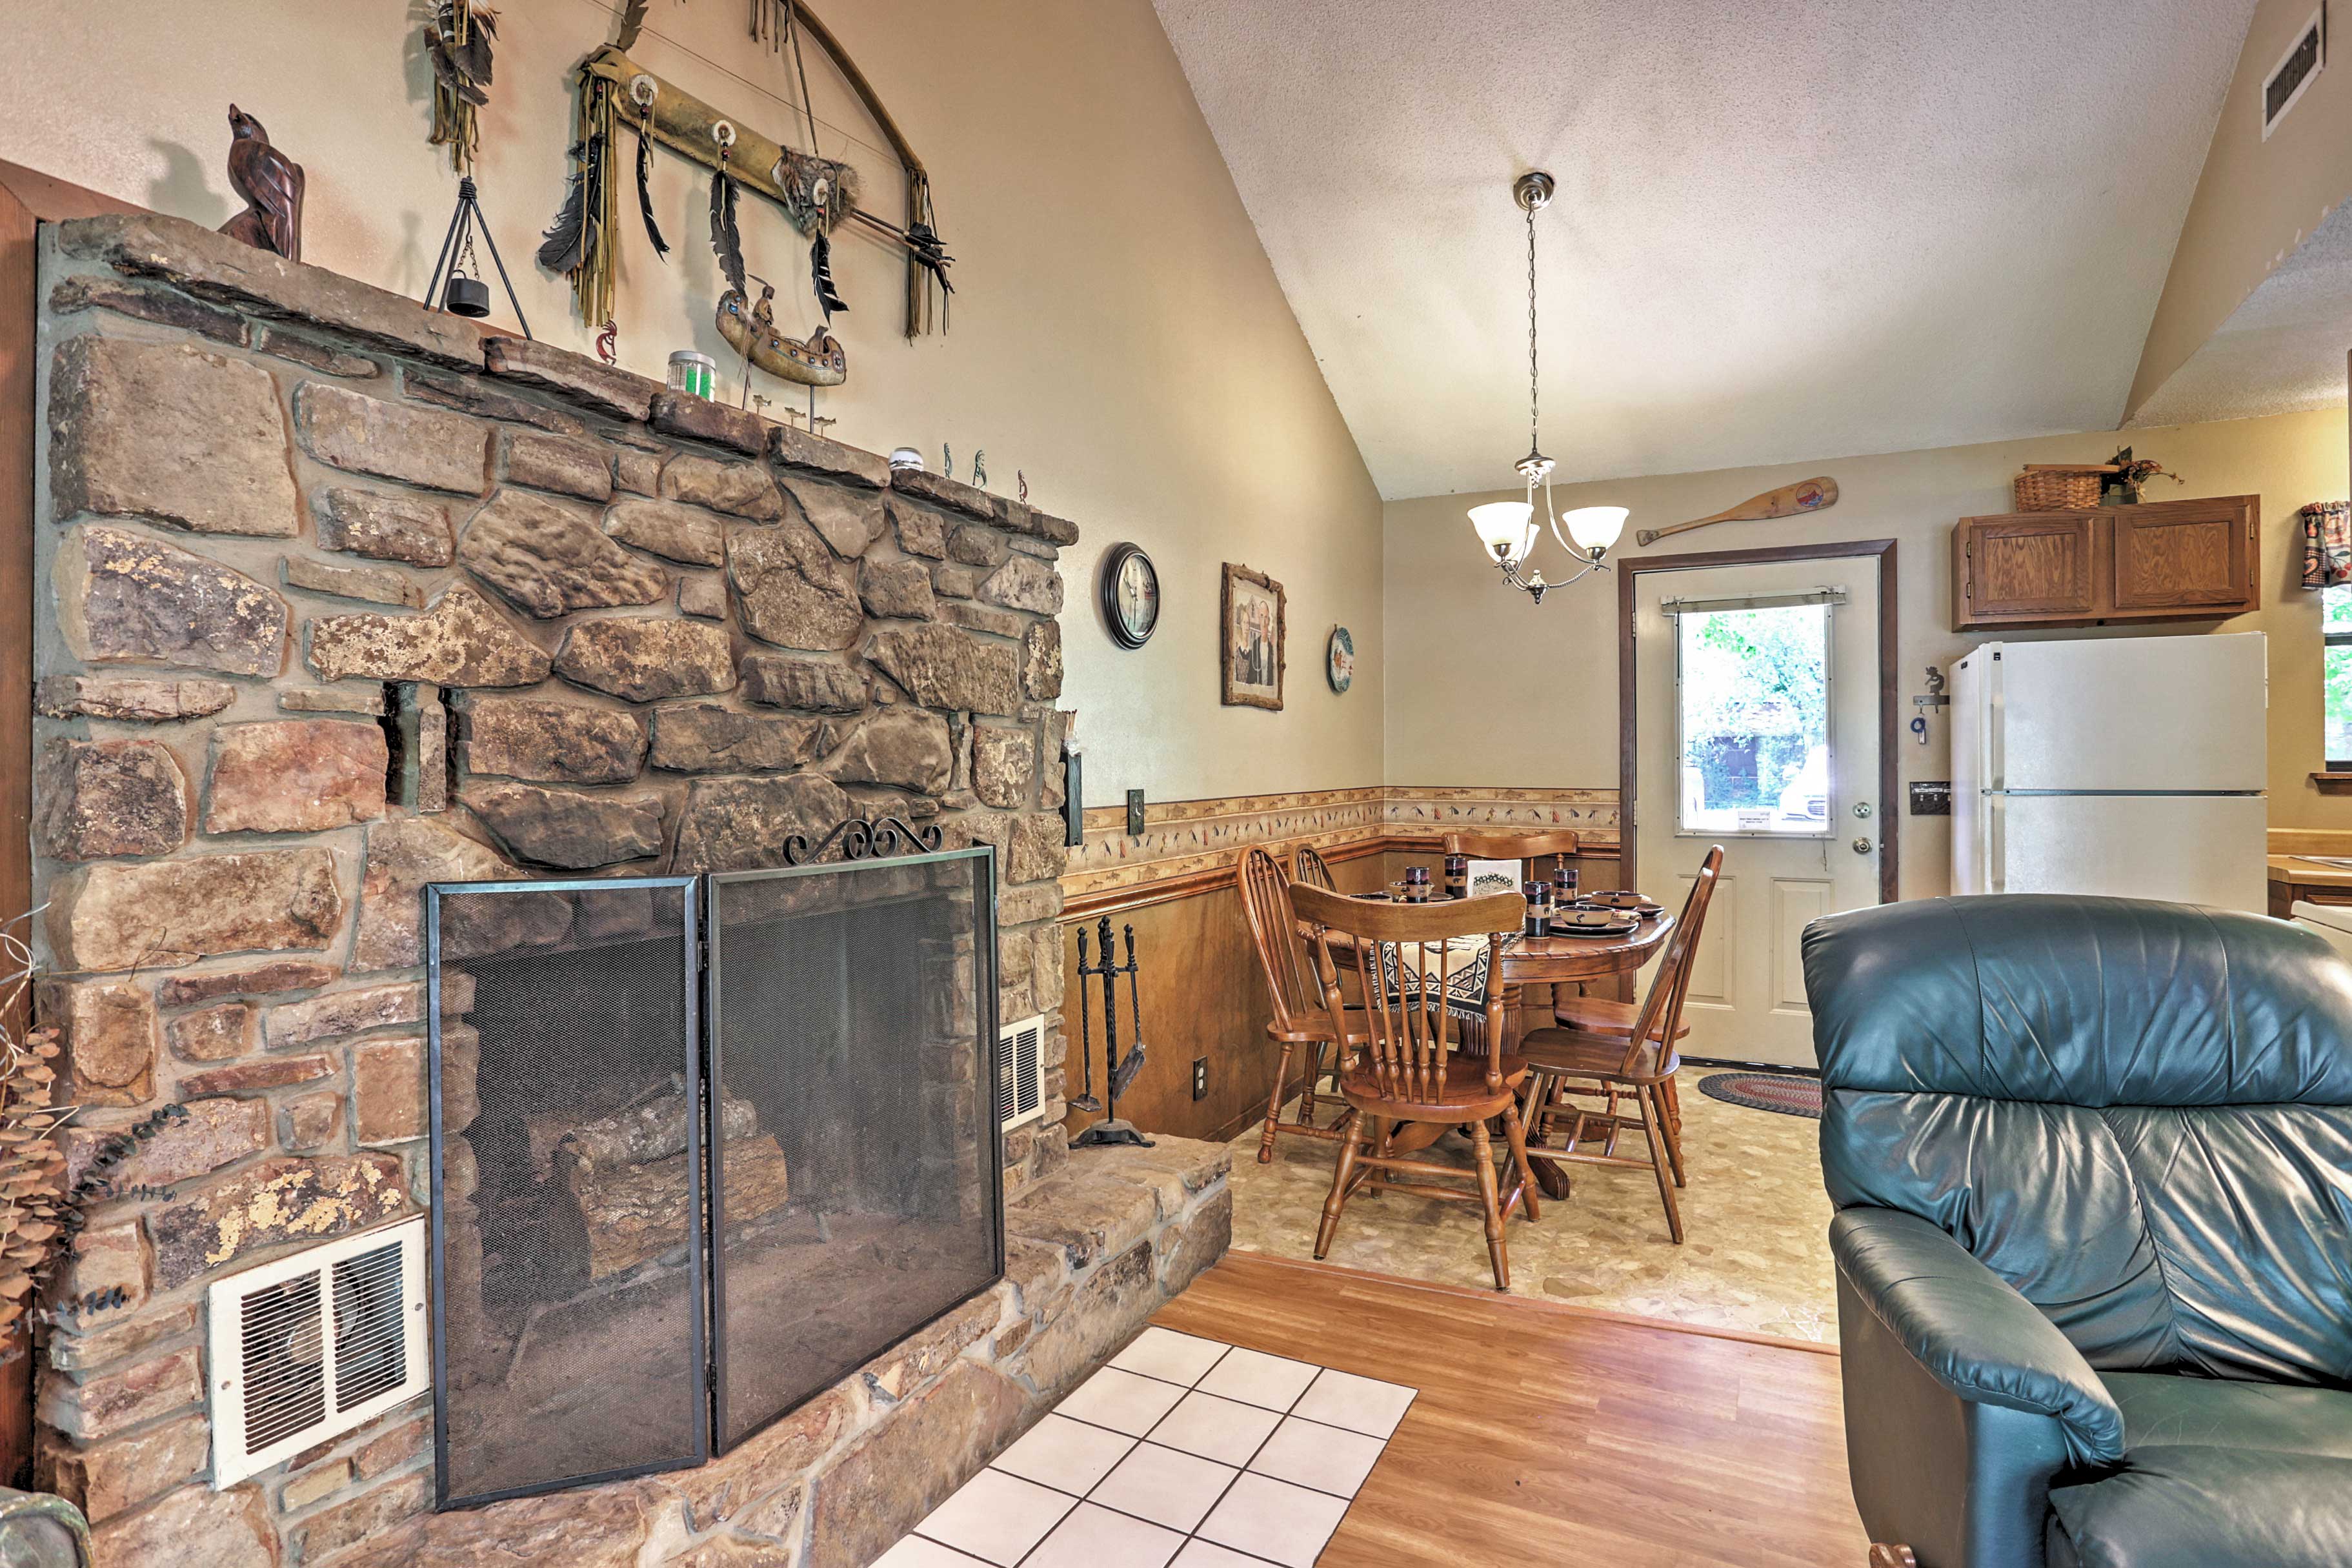 Cozy up with your significant other next to the stone fireplace.